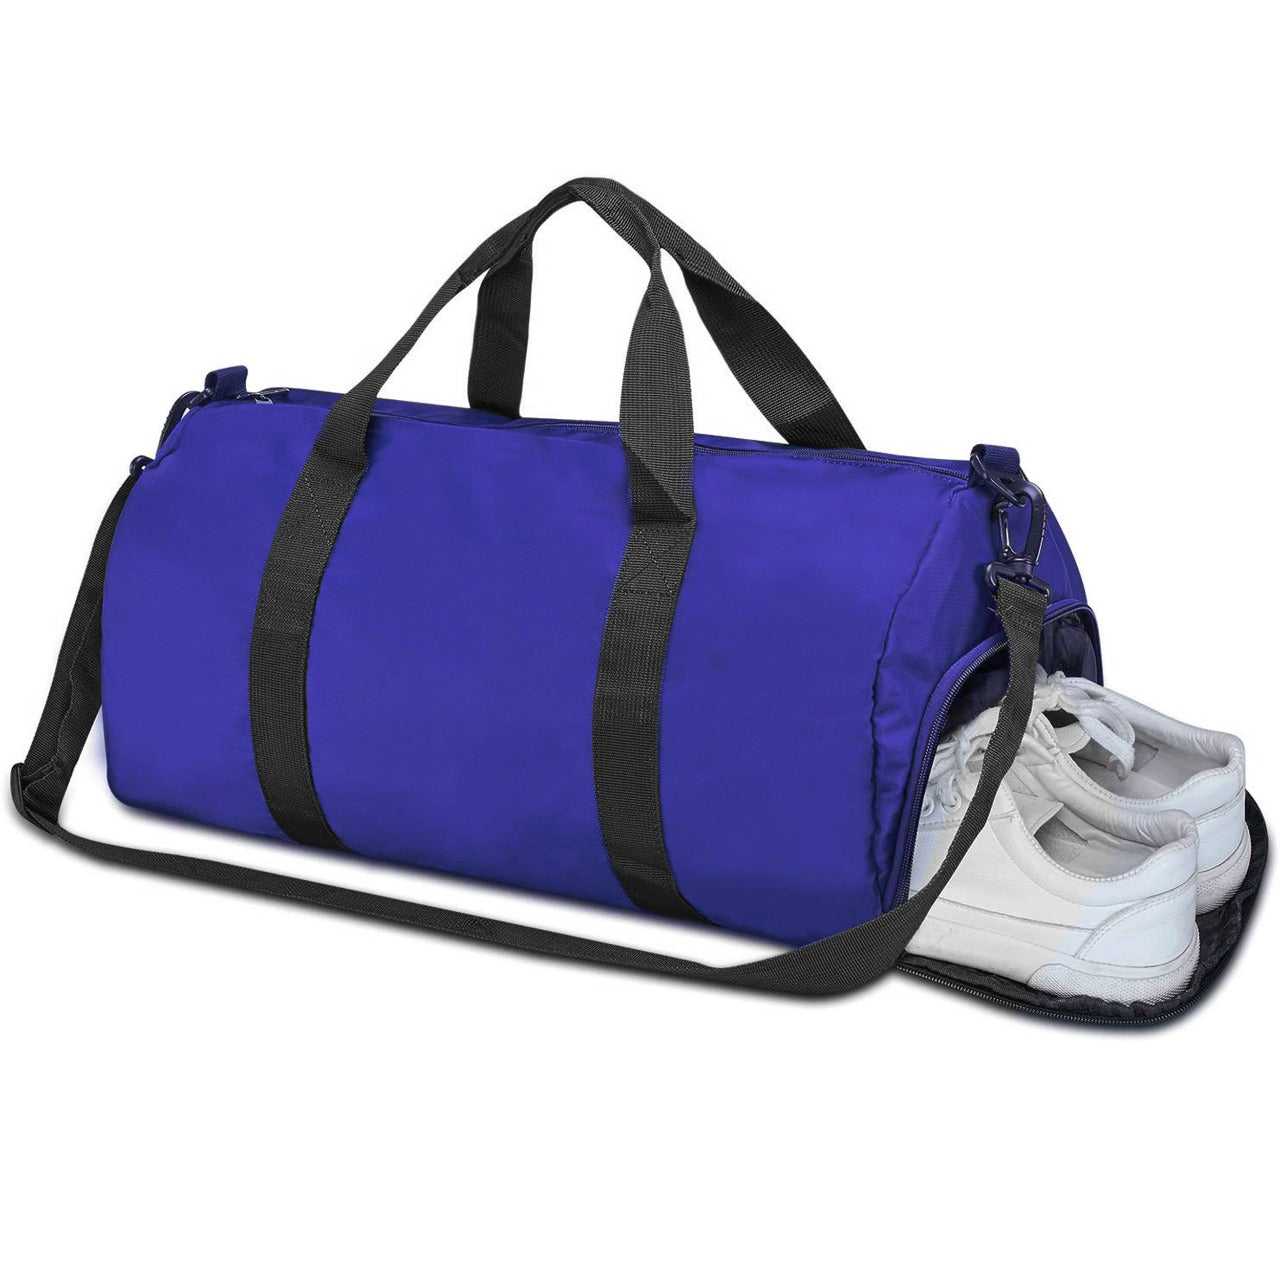 Gym Duffle Bag Barrel Bag With Shoe Compartment Repton Fitness Gear